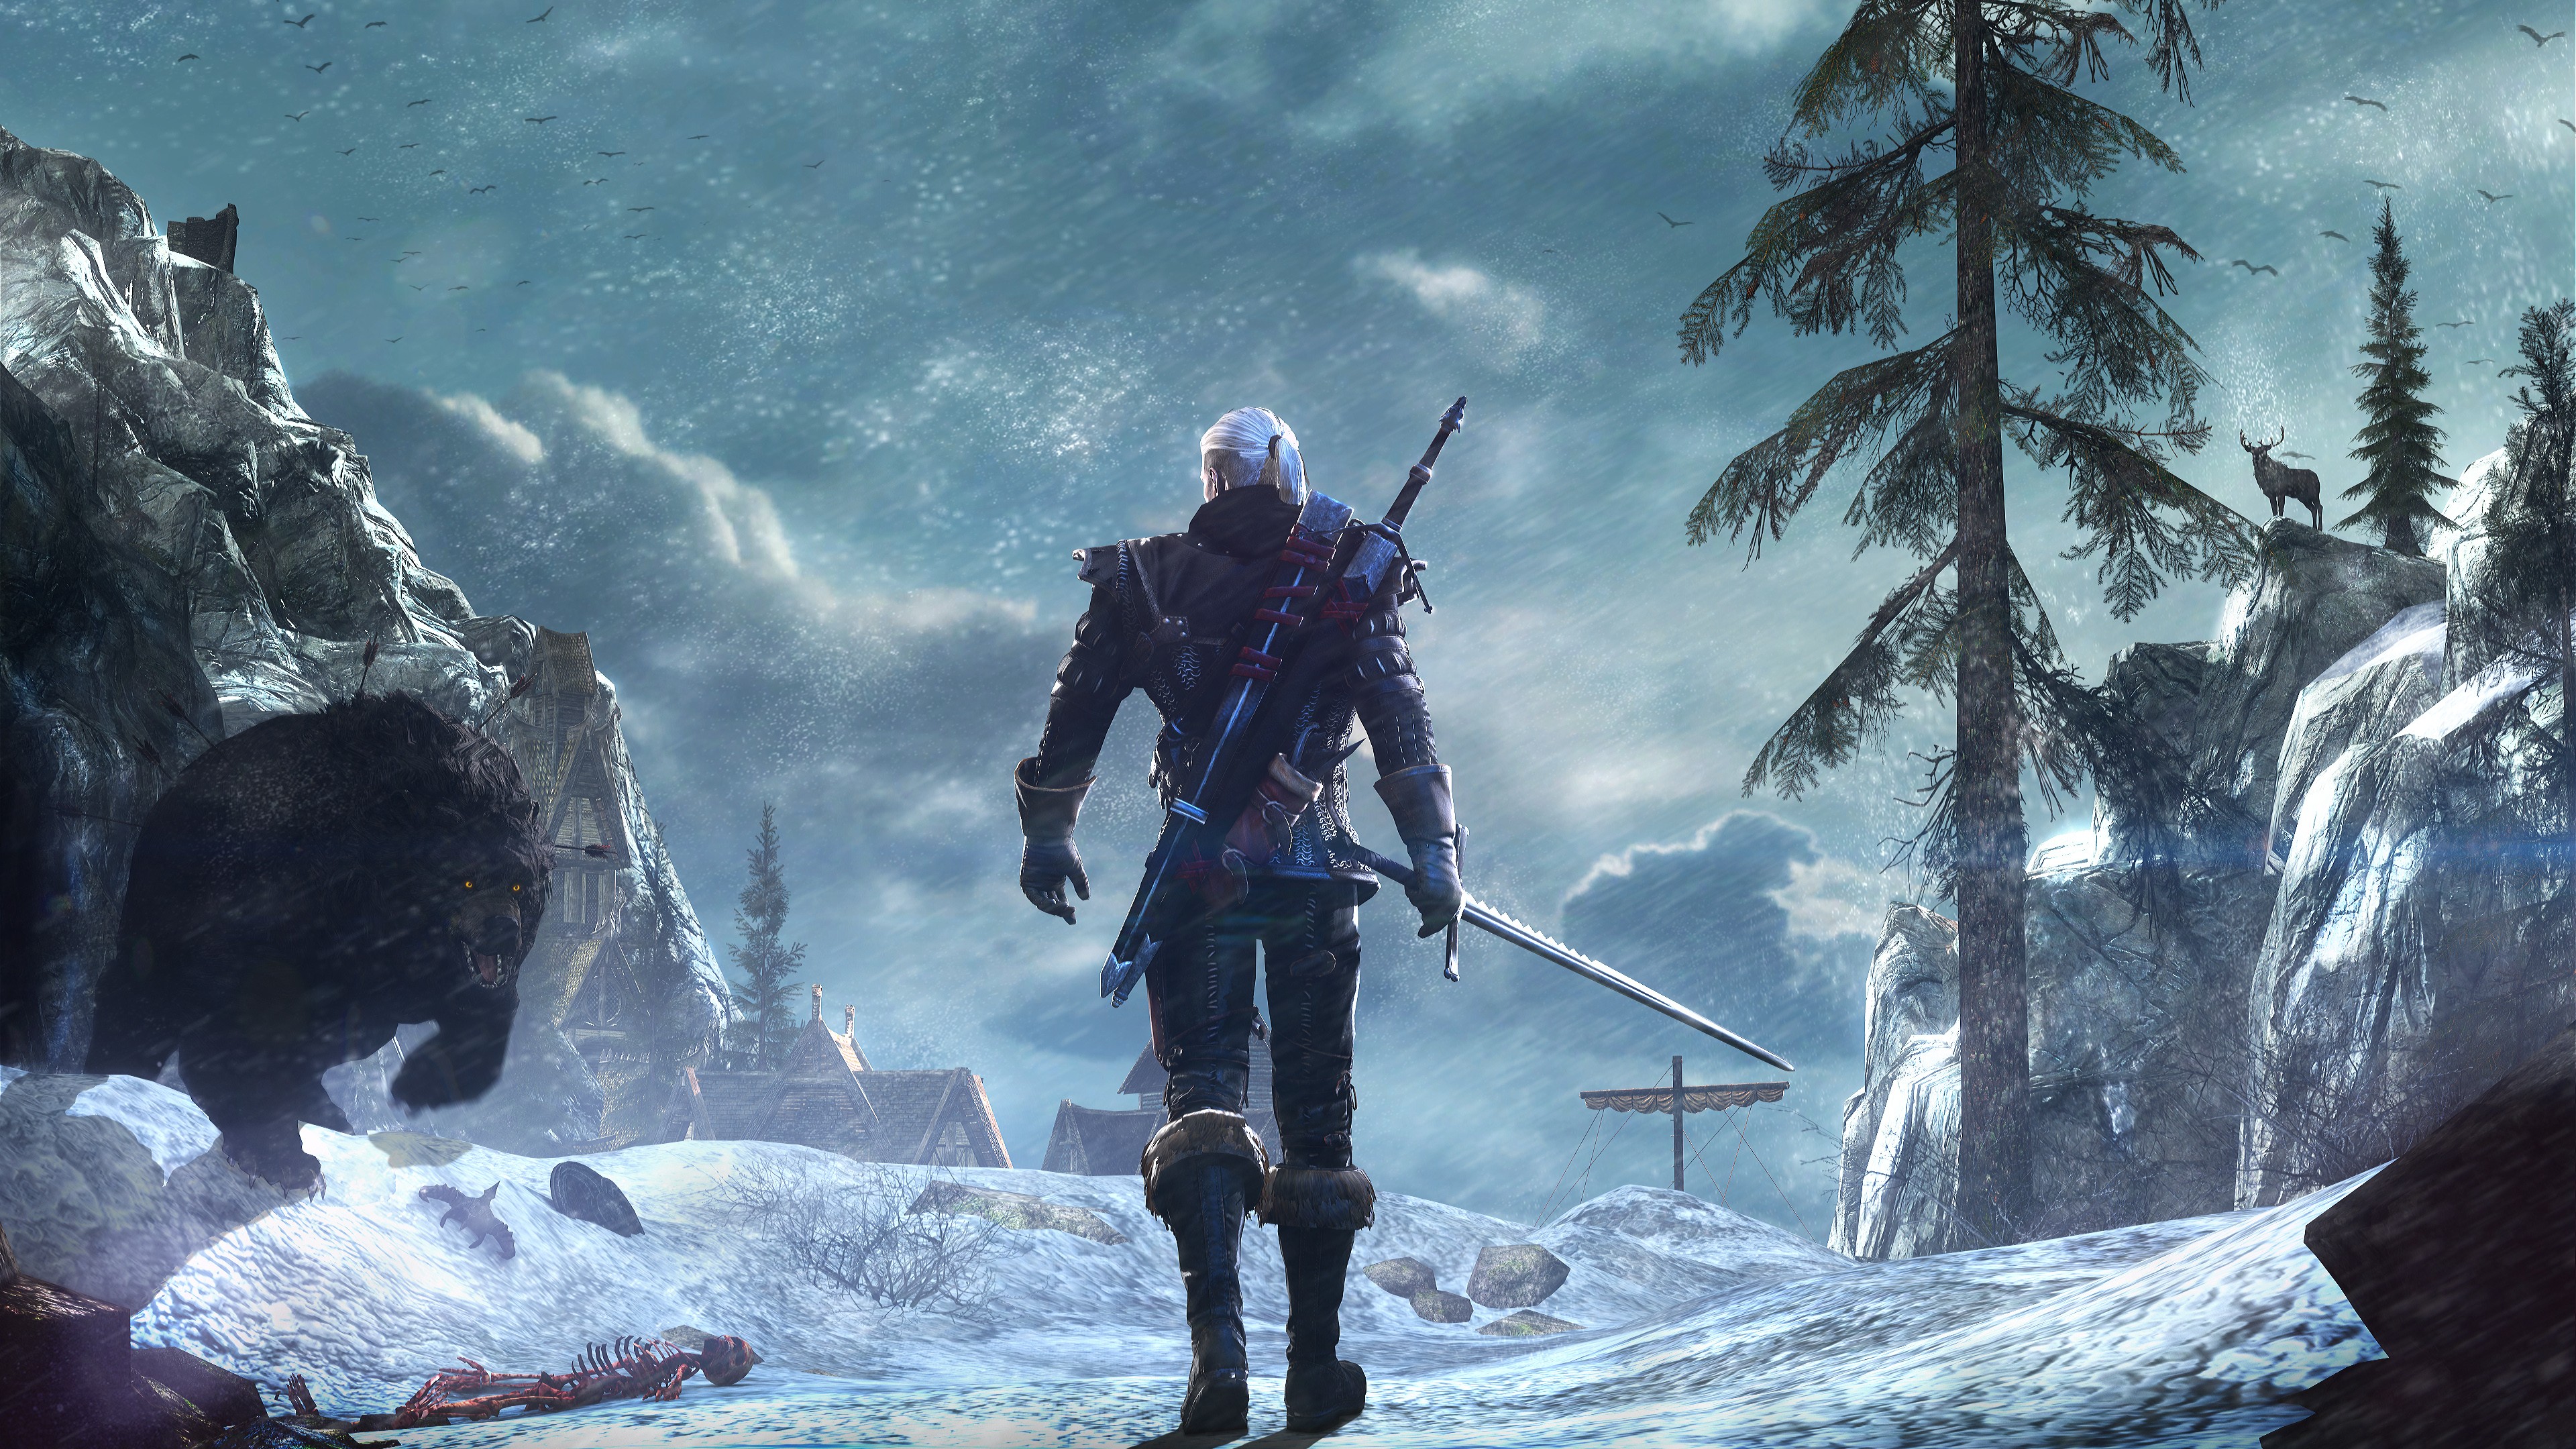 General 3840x2160 The Witcher 3: Wild Hunt Geralt of Rivia looking into the distance RPG video games PC gaming video game men sword bears glowing eyes creature